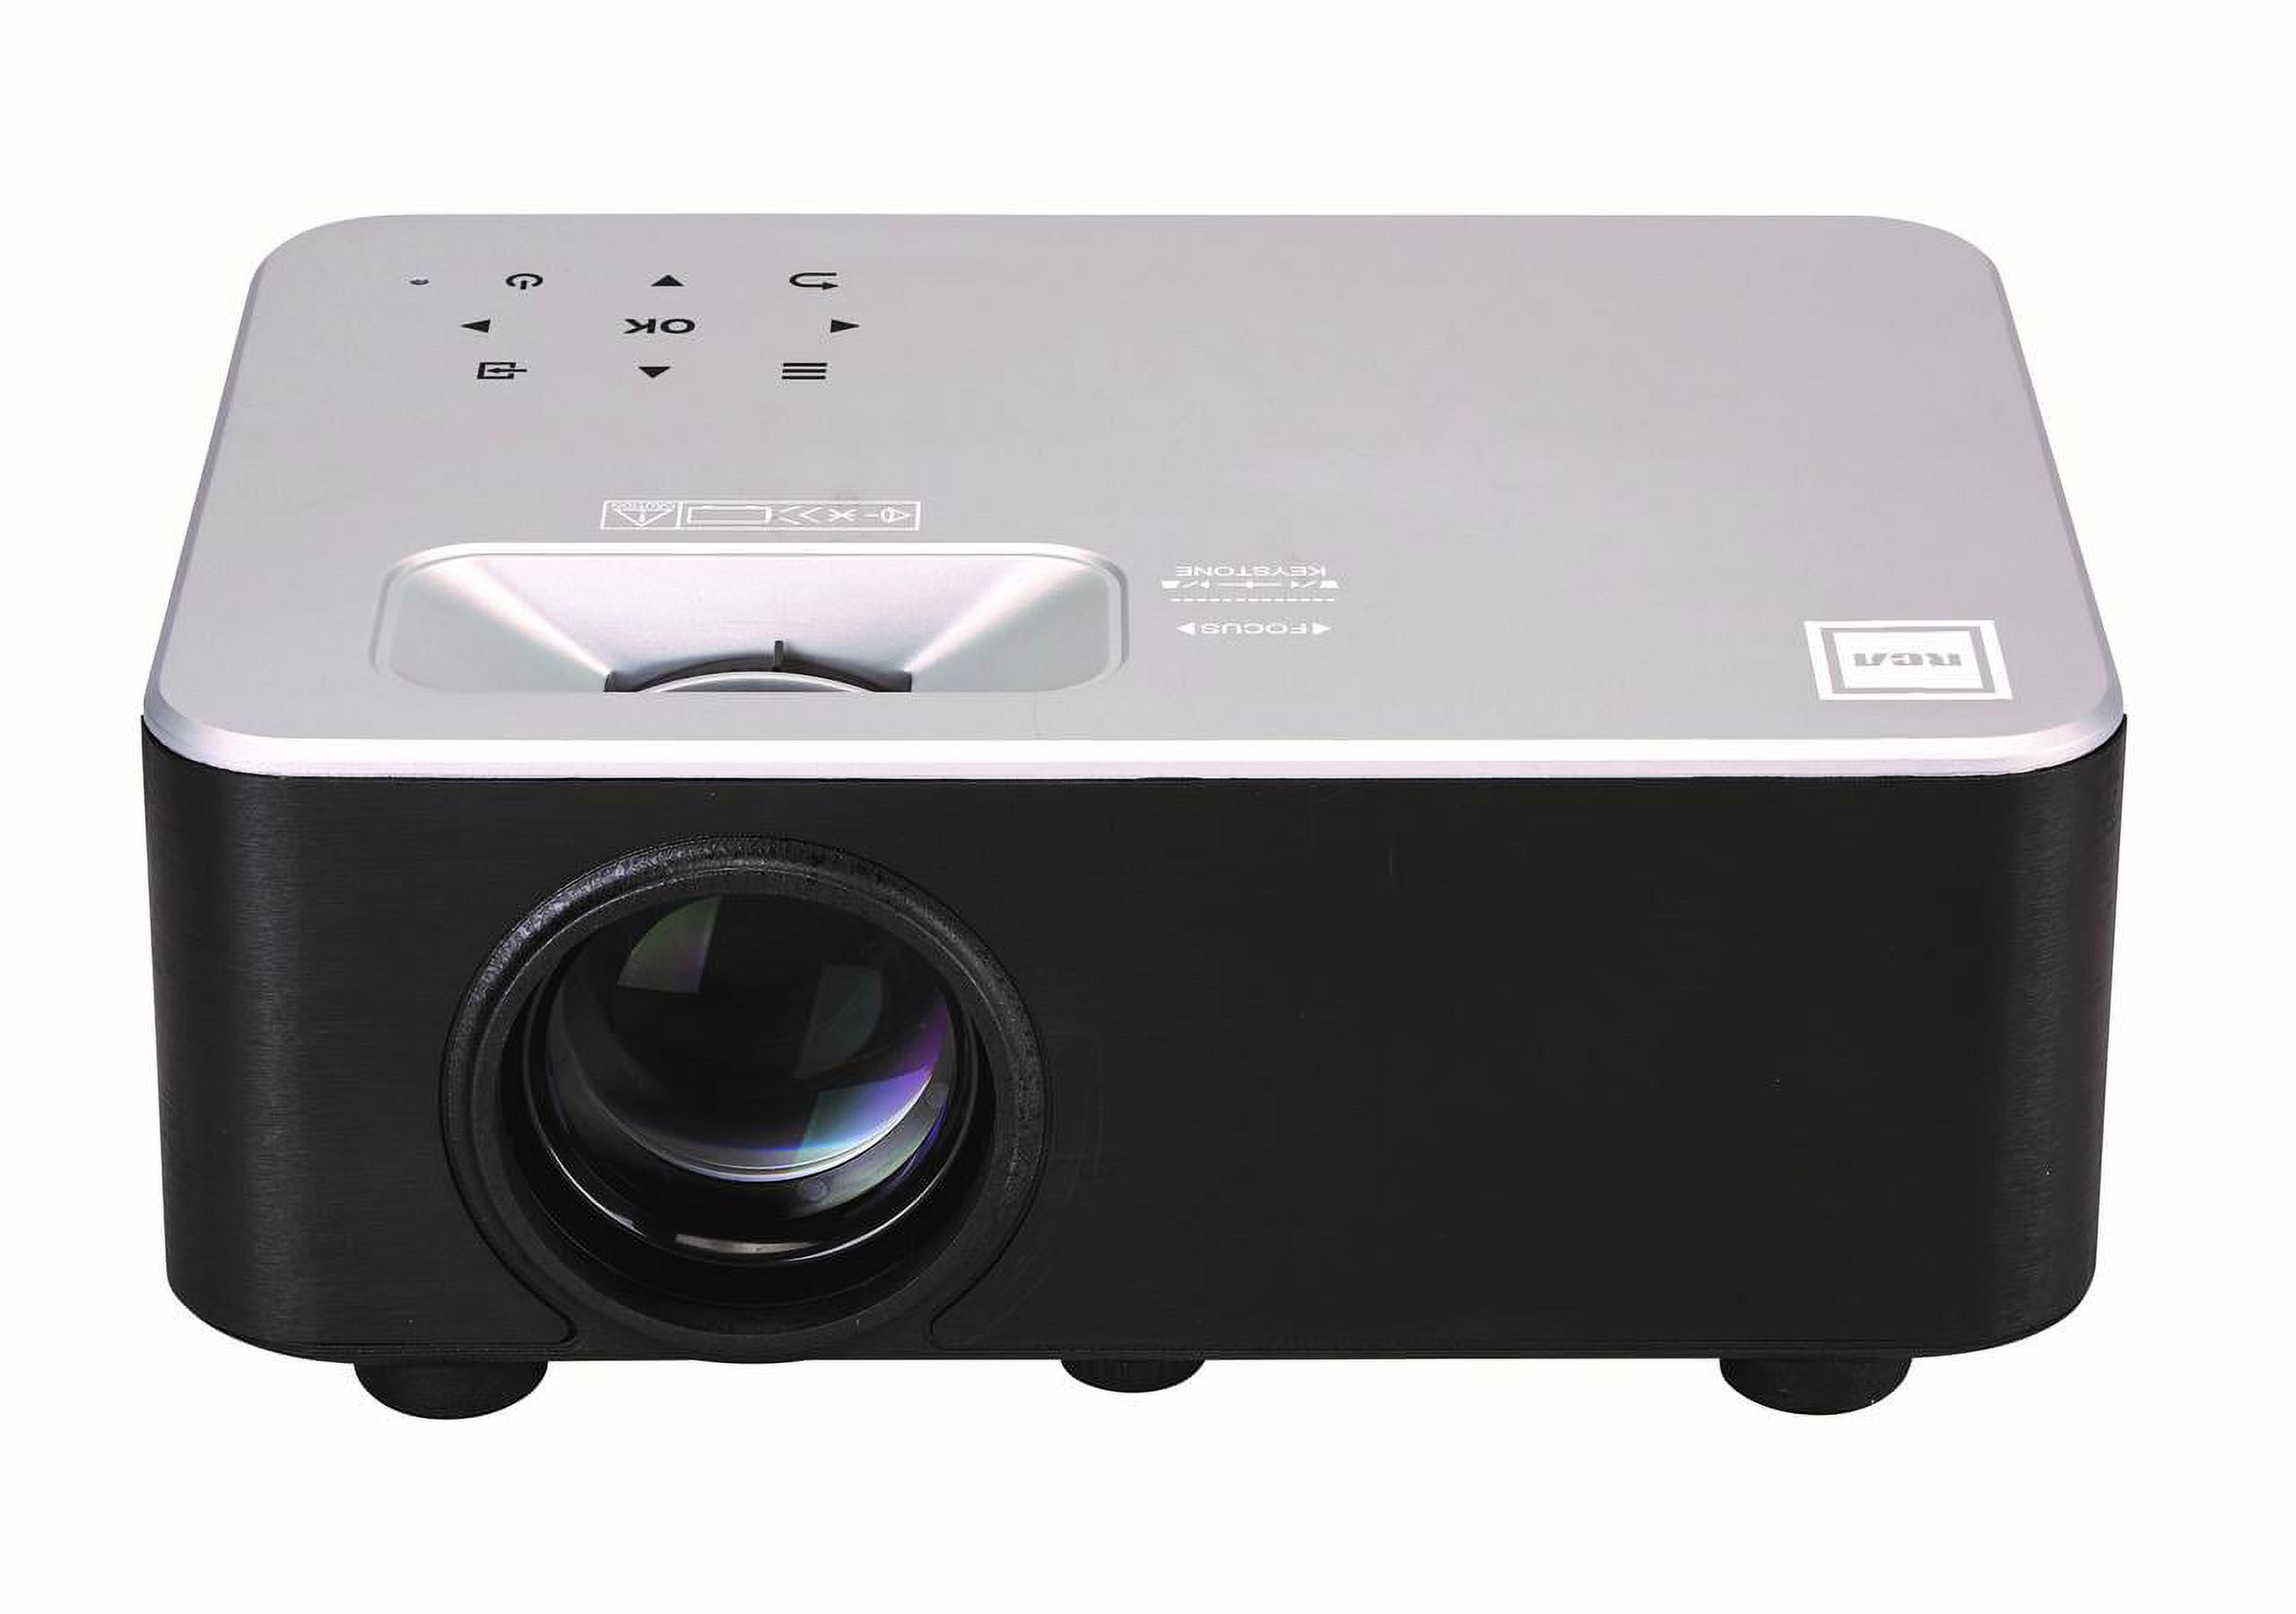 RCA 720p Smart Wi-Fi Home Theater Projector w/ Roku Stick - image 5 of 10